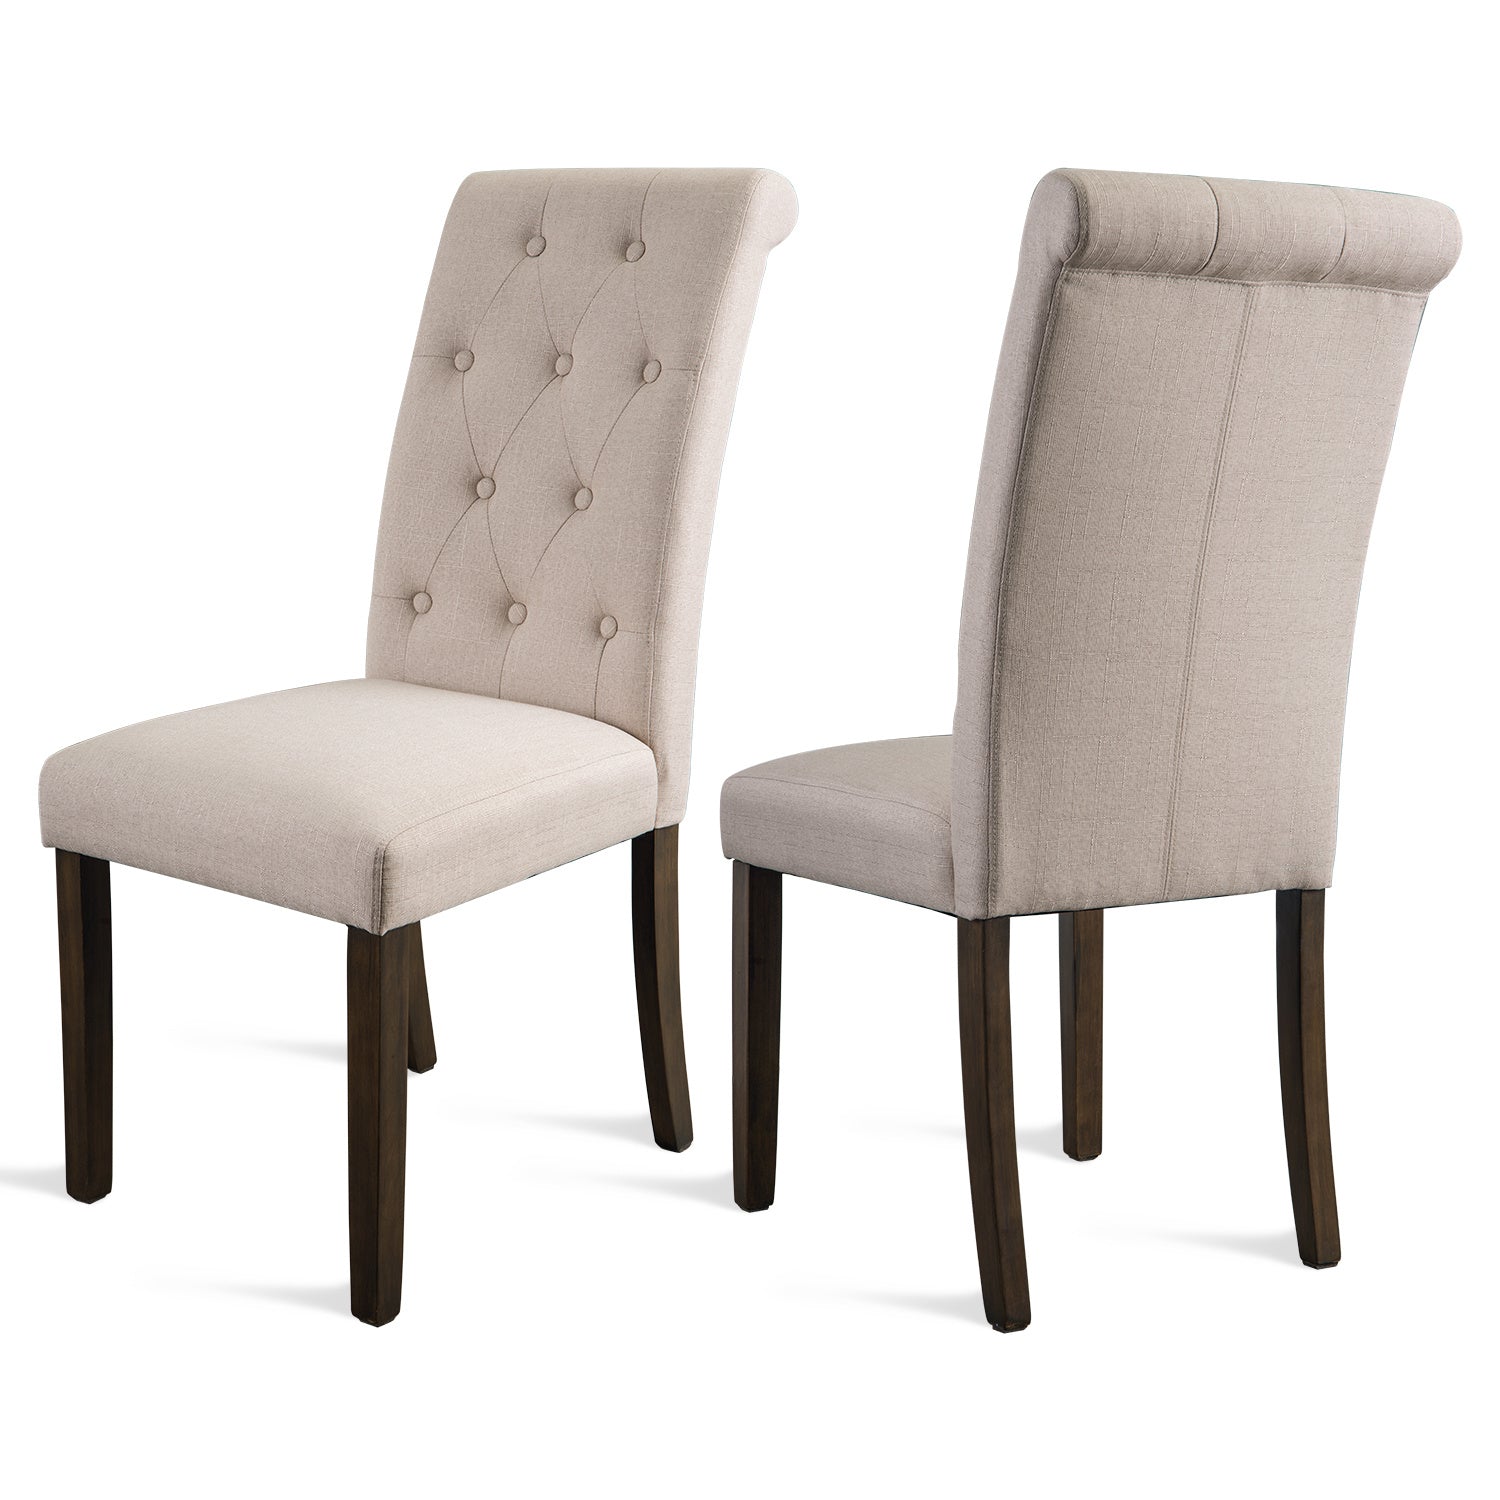 Merax Aristocratic Style Dining Chair Noble and Elegant Solid Wood Tufted Dining Chair Dining Room Set (Set of 2) RT